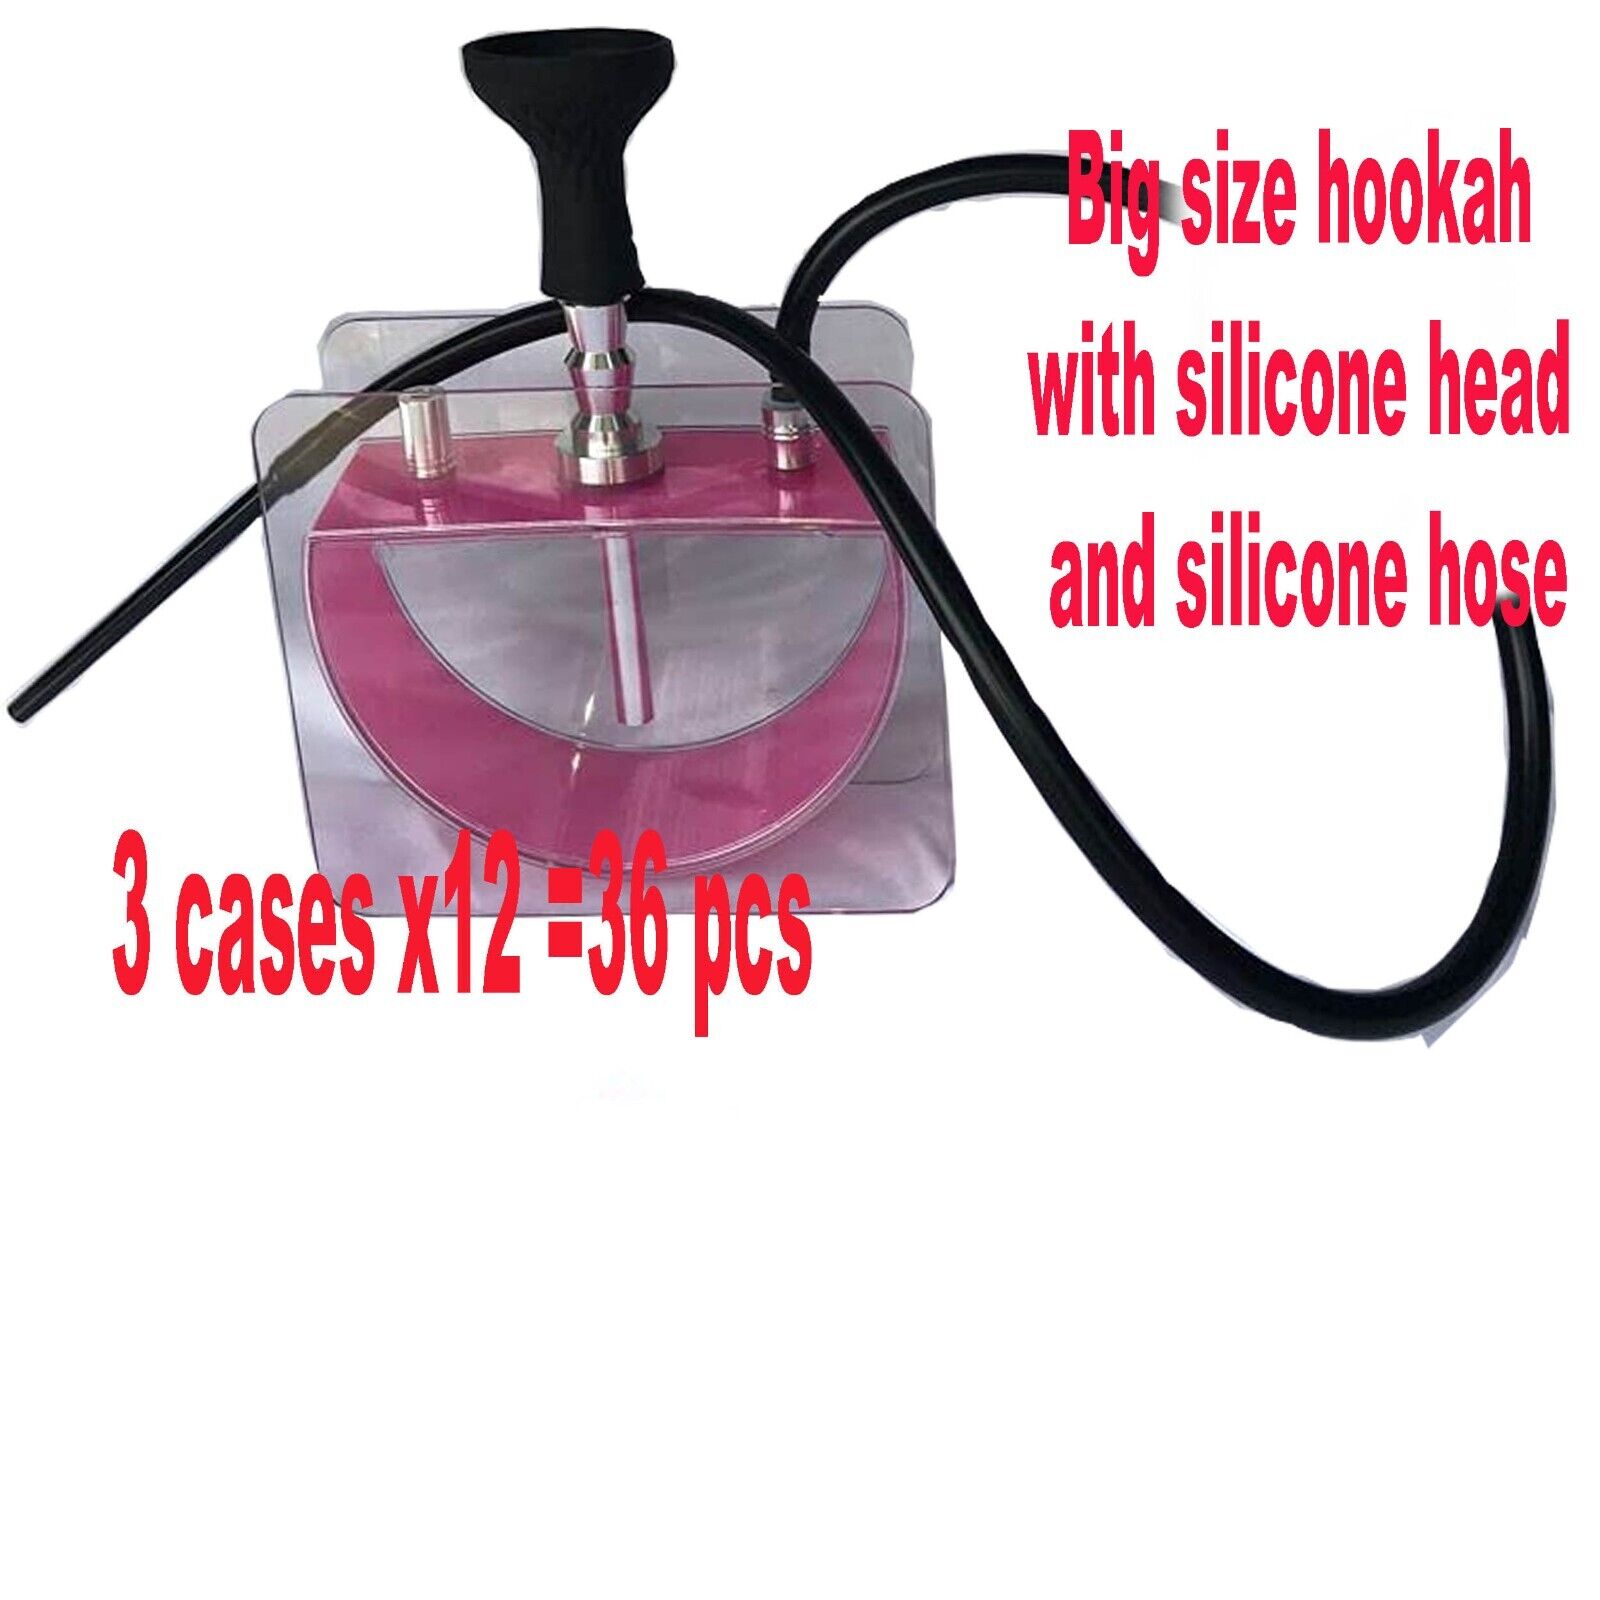 36 acrylic hookah mix color -20$ each -free shipping- wholesale deal-as picturs